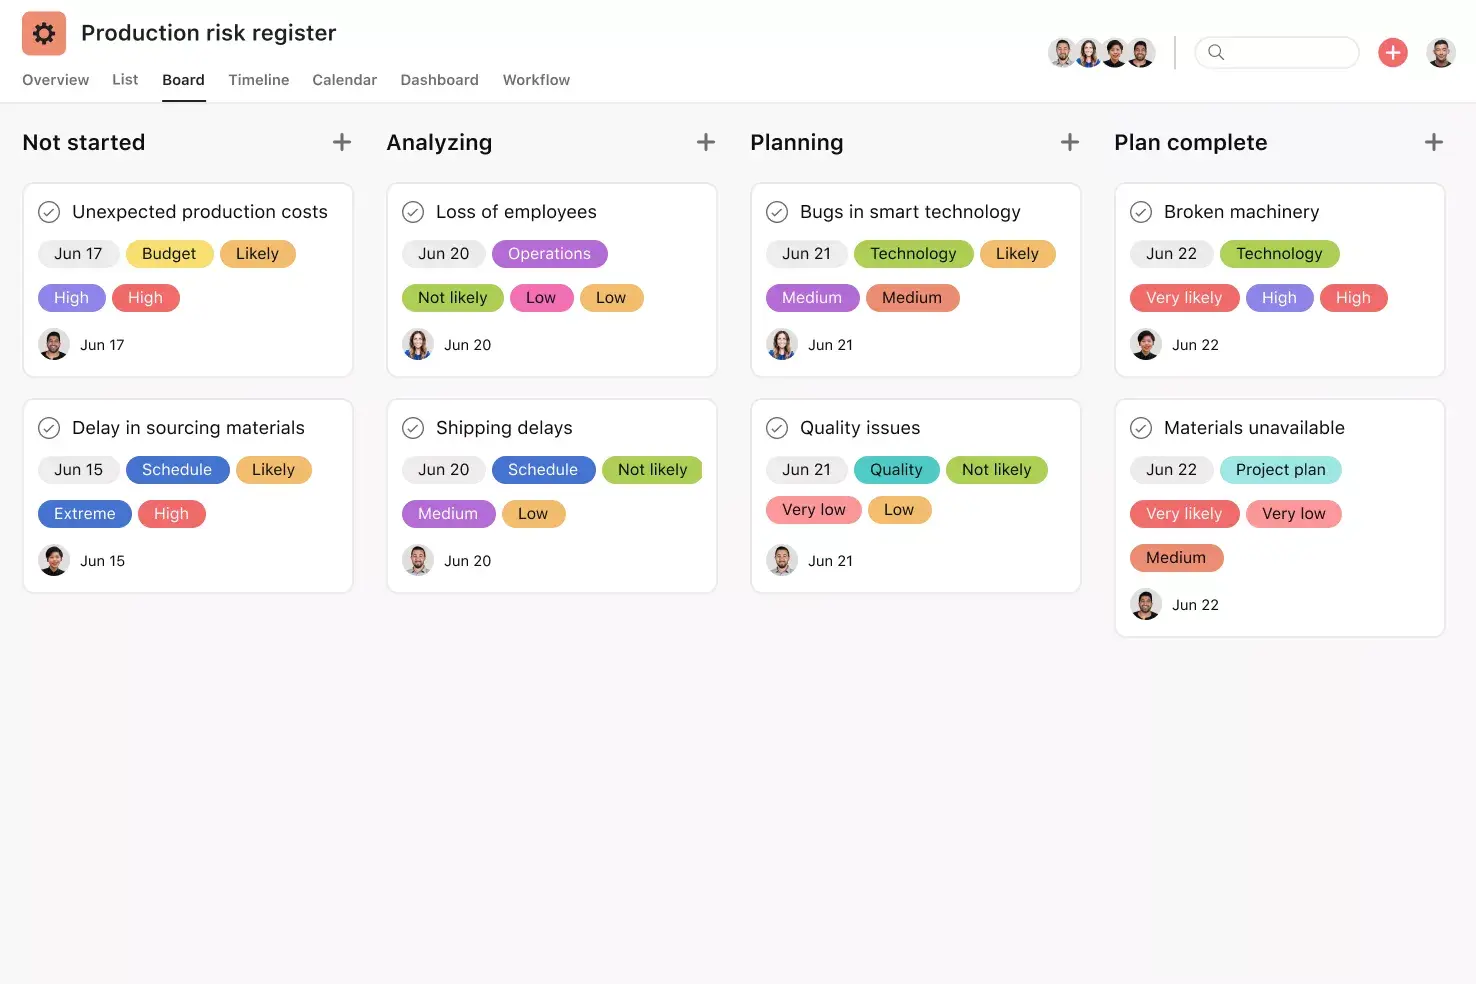 [product ui] Production risk register in Asana, Kanban Board style project view (Board)